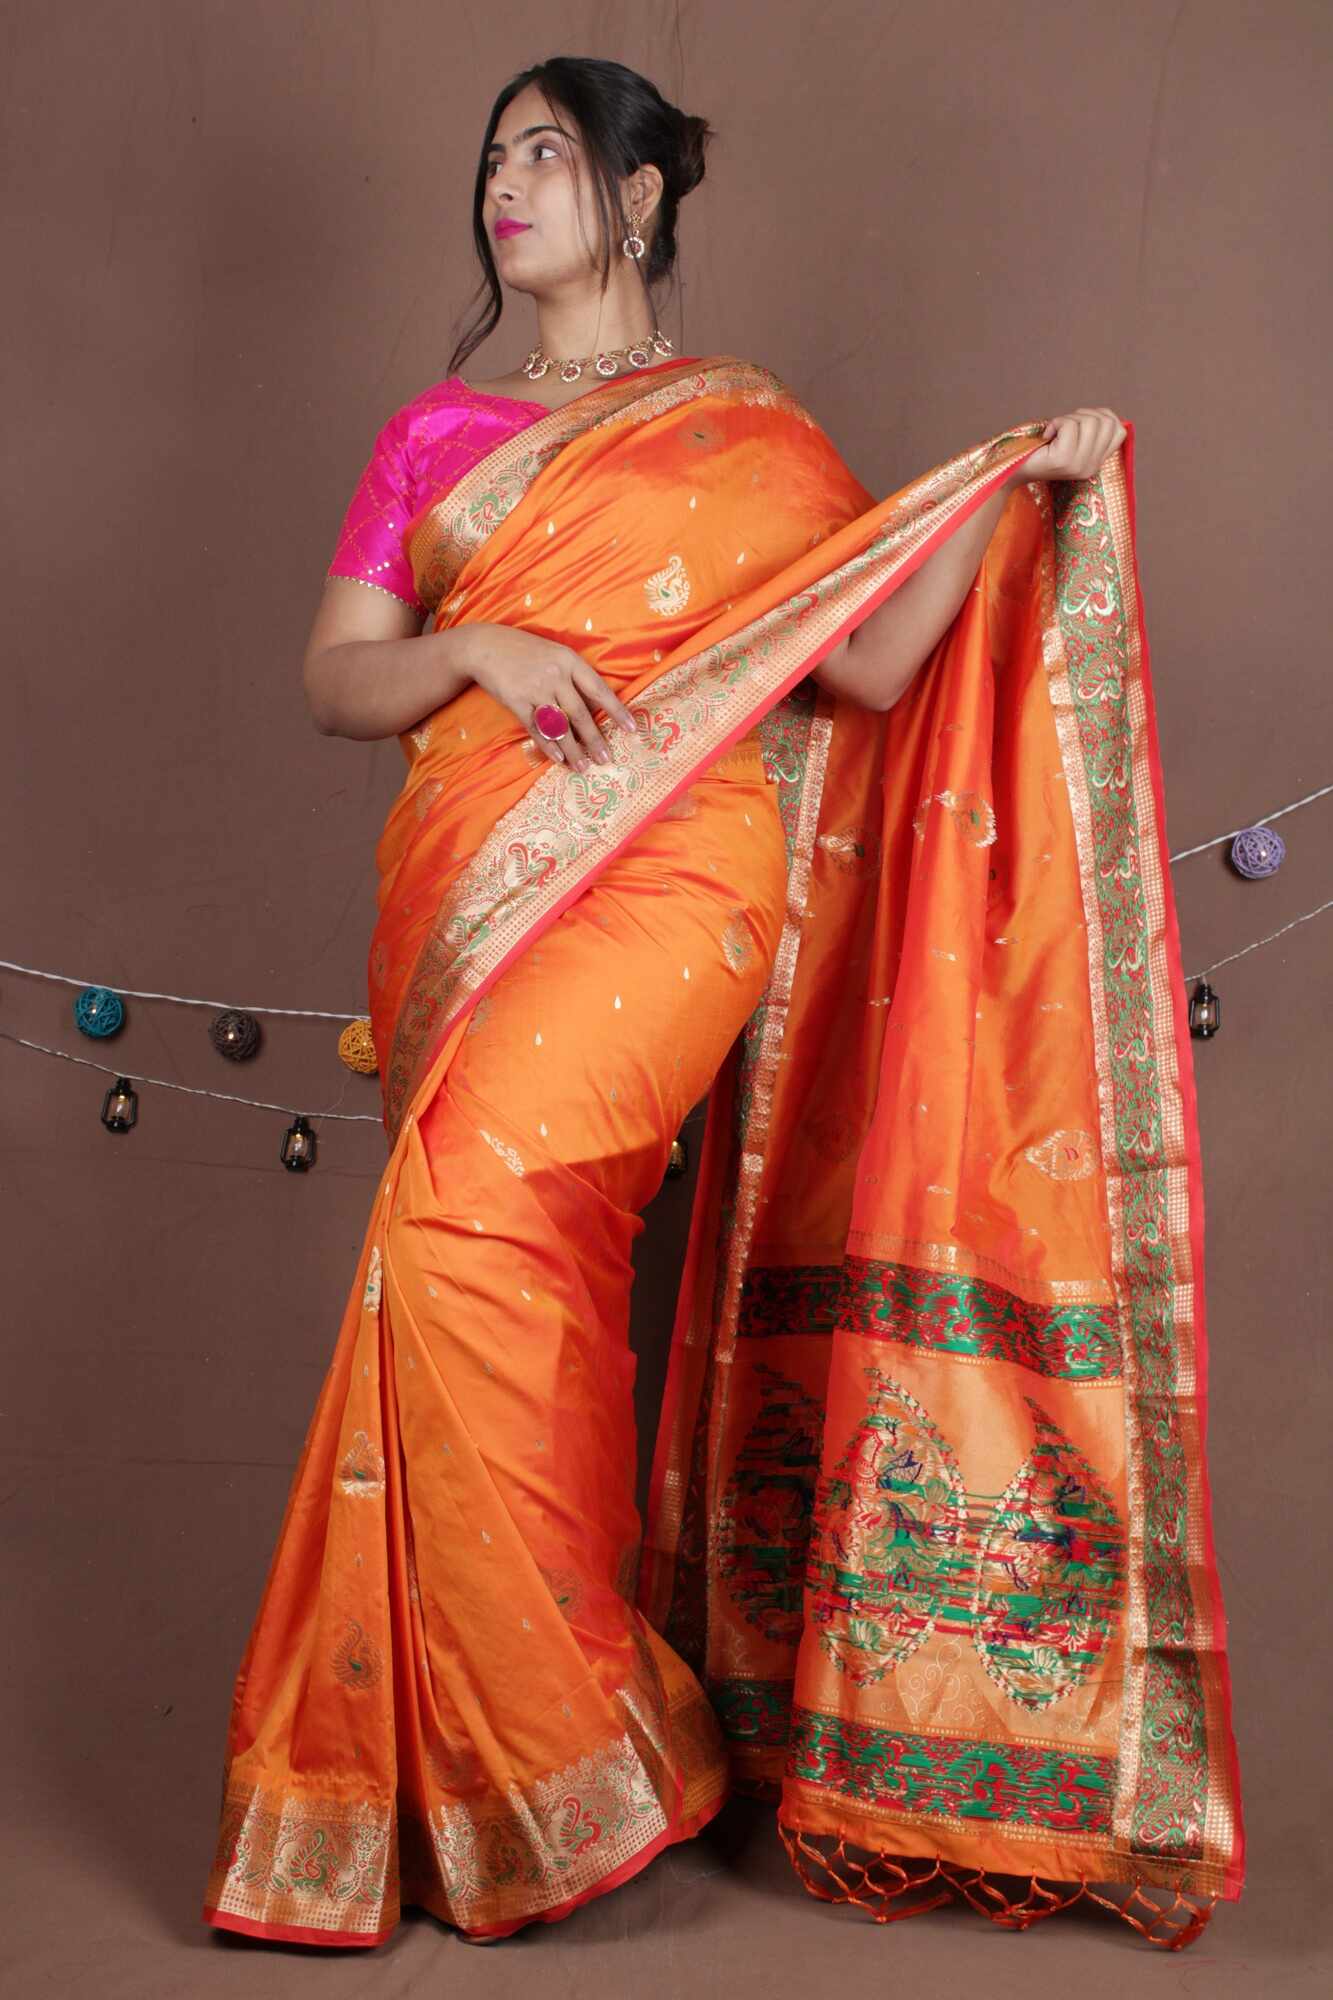 Wedding wear Paithani Border Prestitched Wrap in 1 Minute Saree with ornate pallu - Isadora Life Online Shopping Store